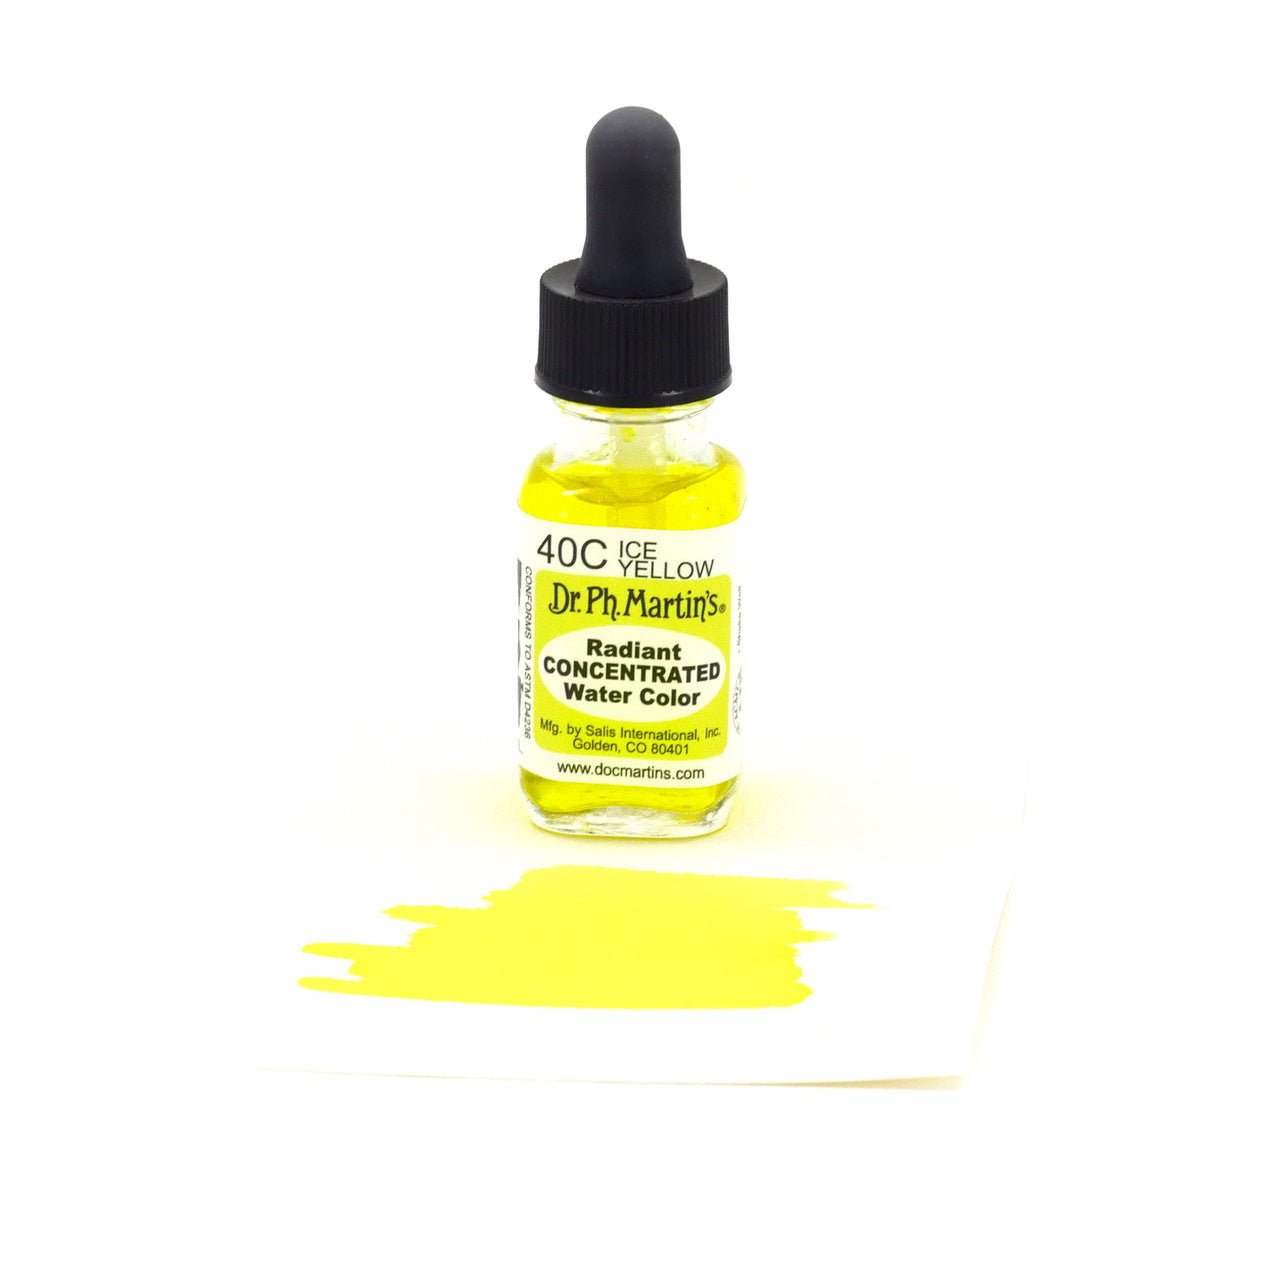 Dr. Ph. Martin's Radiant Watercolor .5 oz - Ice Yellow - merriartist.com